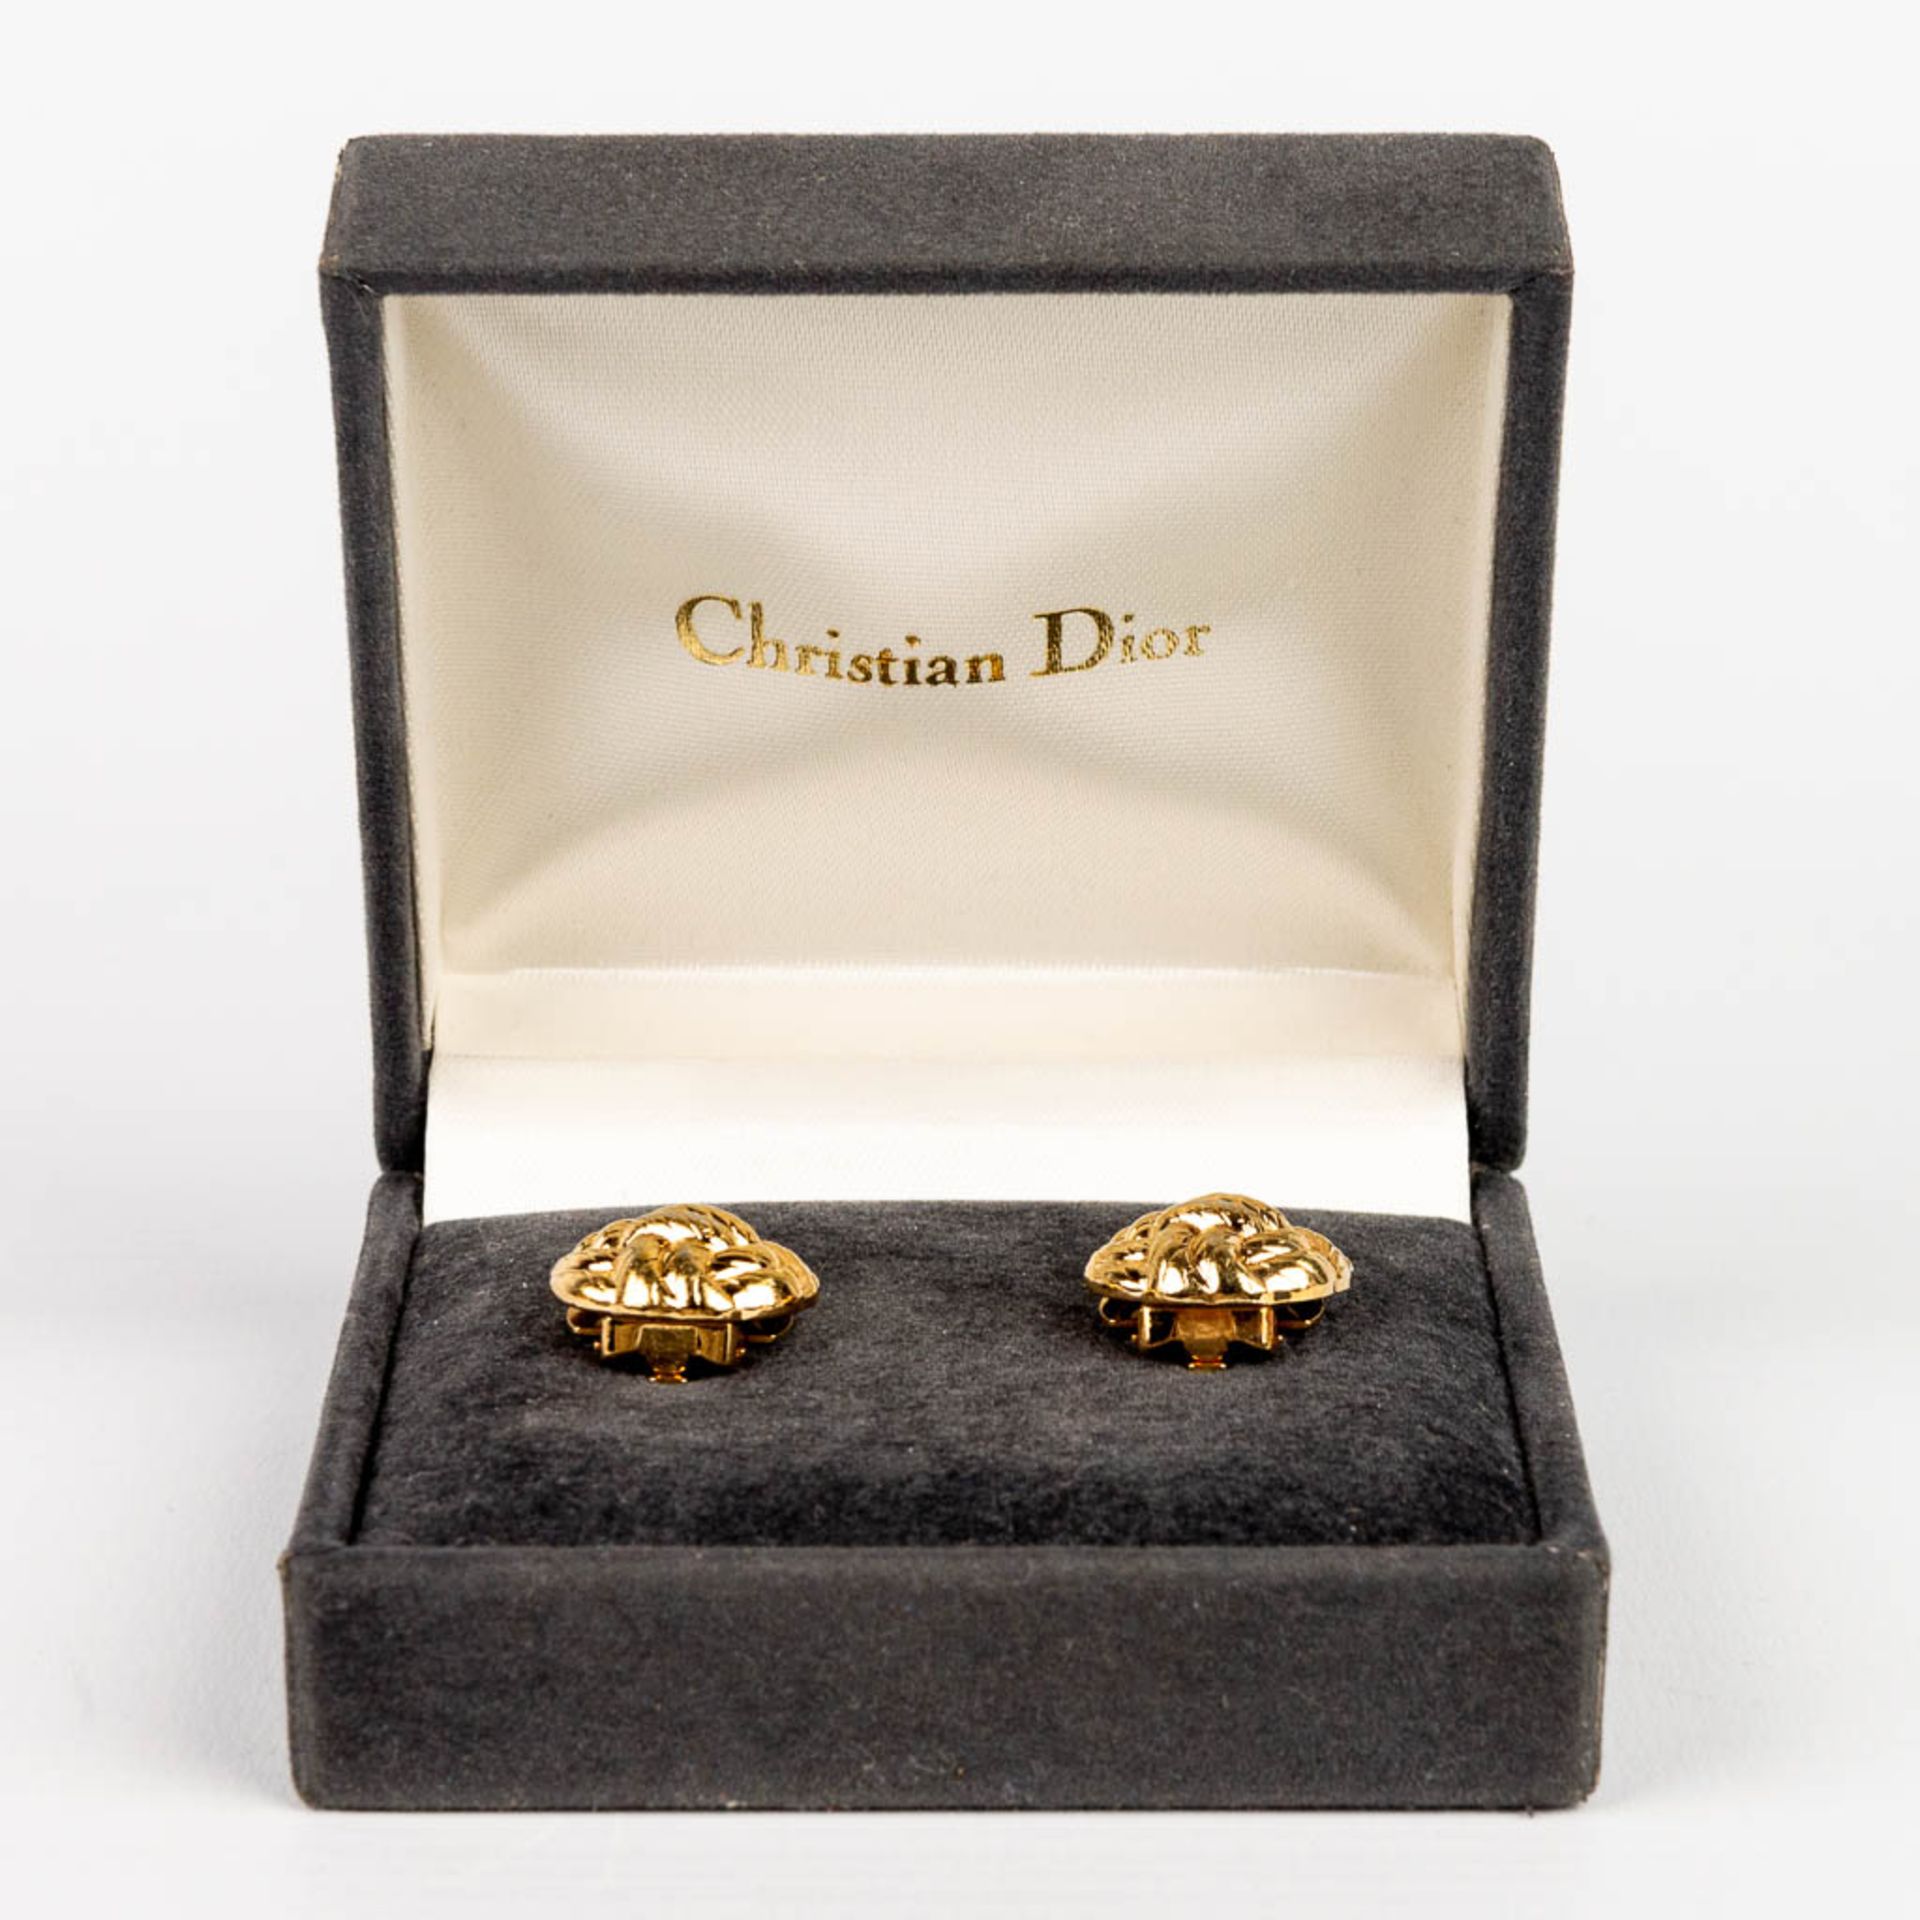 A pair of button covers made by Christian Dior, gold-plated. - Image 3 of 6